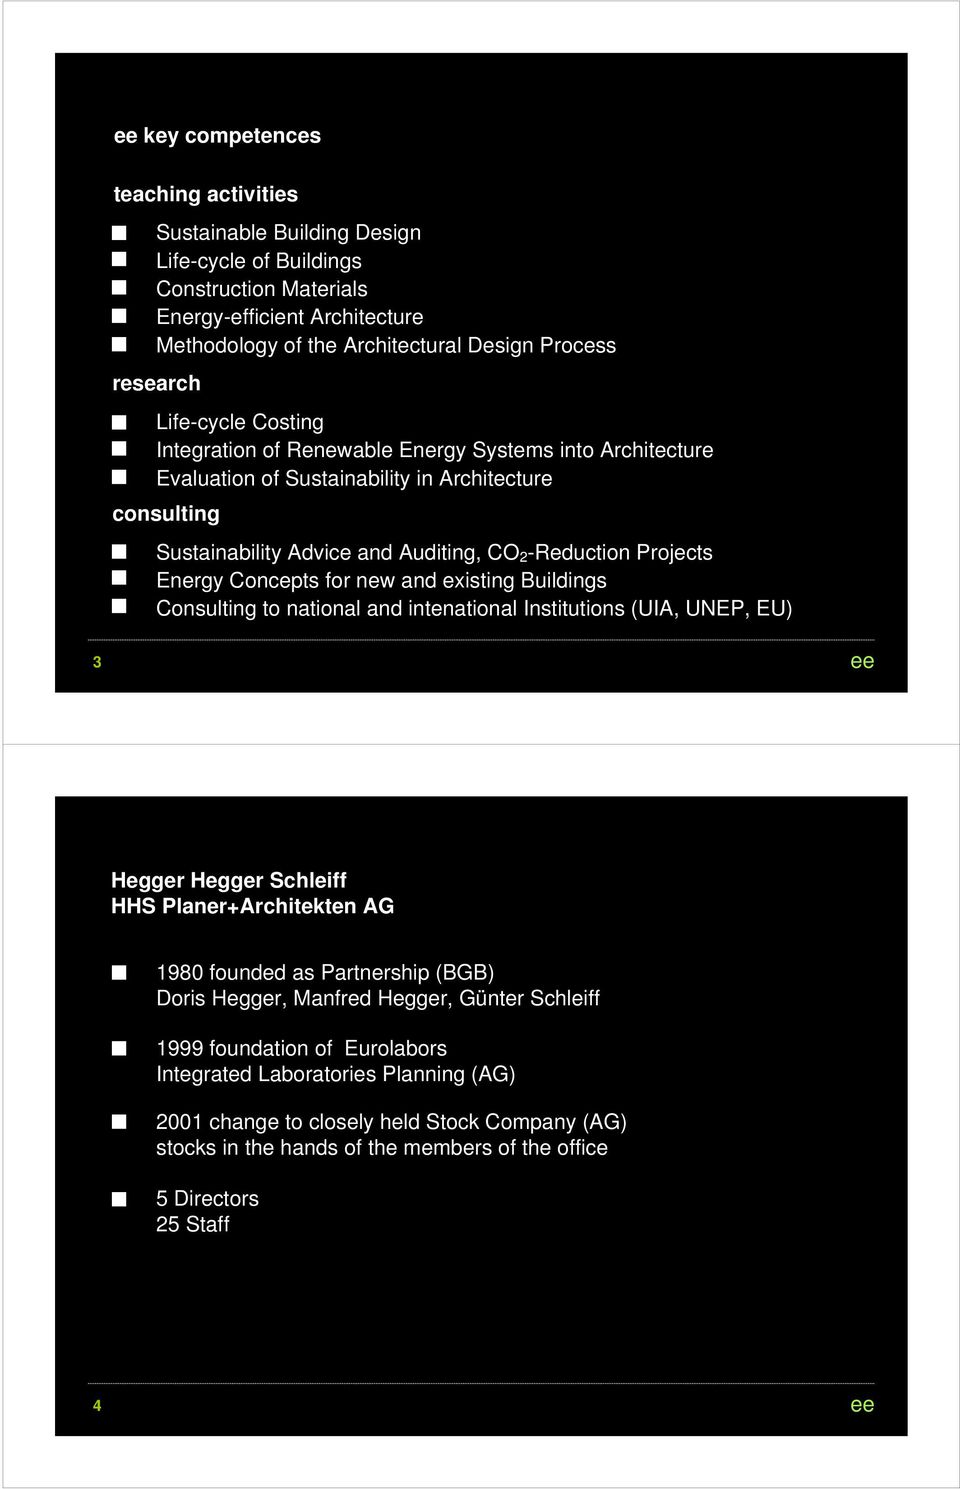 Energy Concepts for new and existing Buildings Consulting to national and intenational Institutions (UIA, UNEP, EU) 3 Hegger Hegger Schleiff HHS Planer+Architekten AG 1980 founded as Partnership